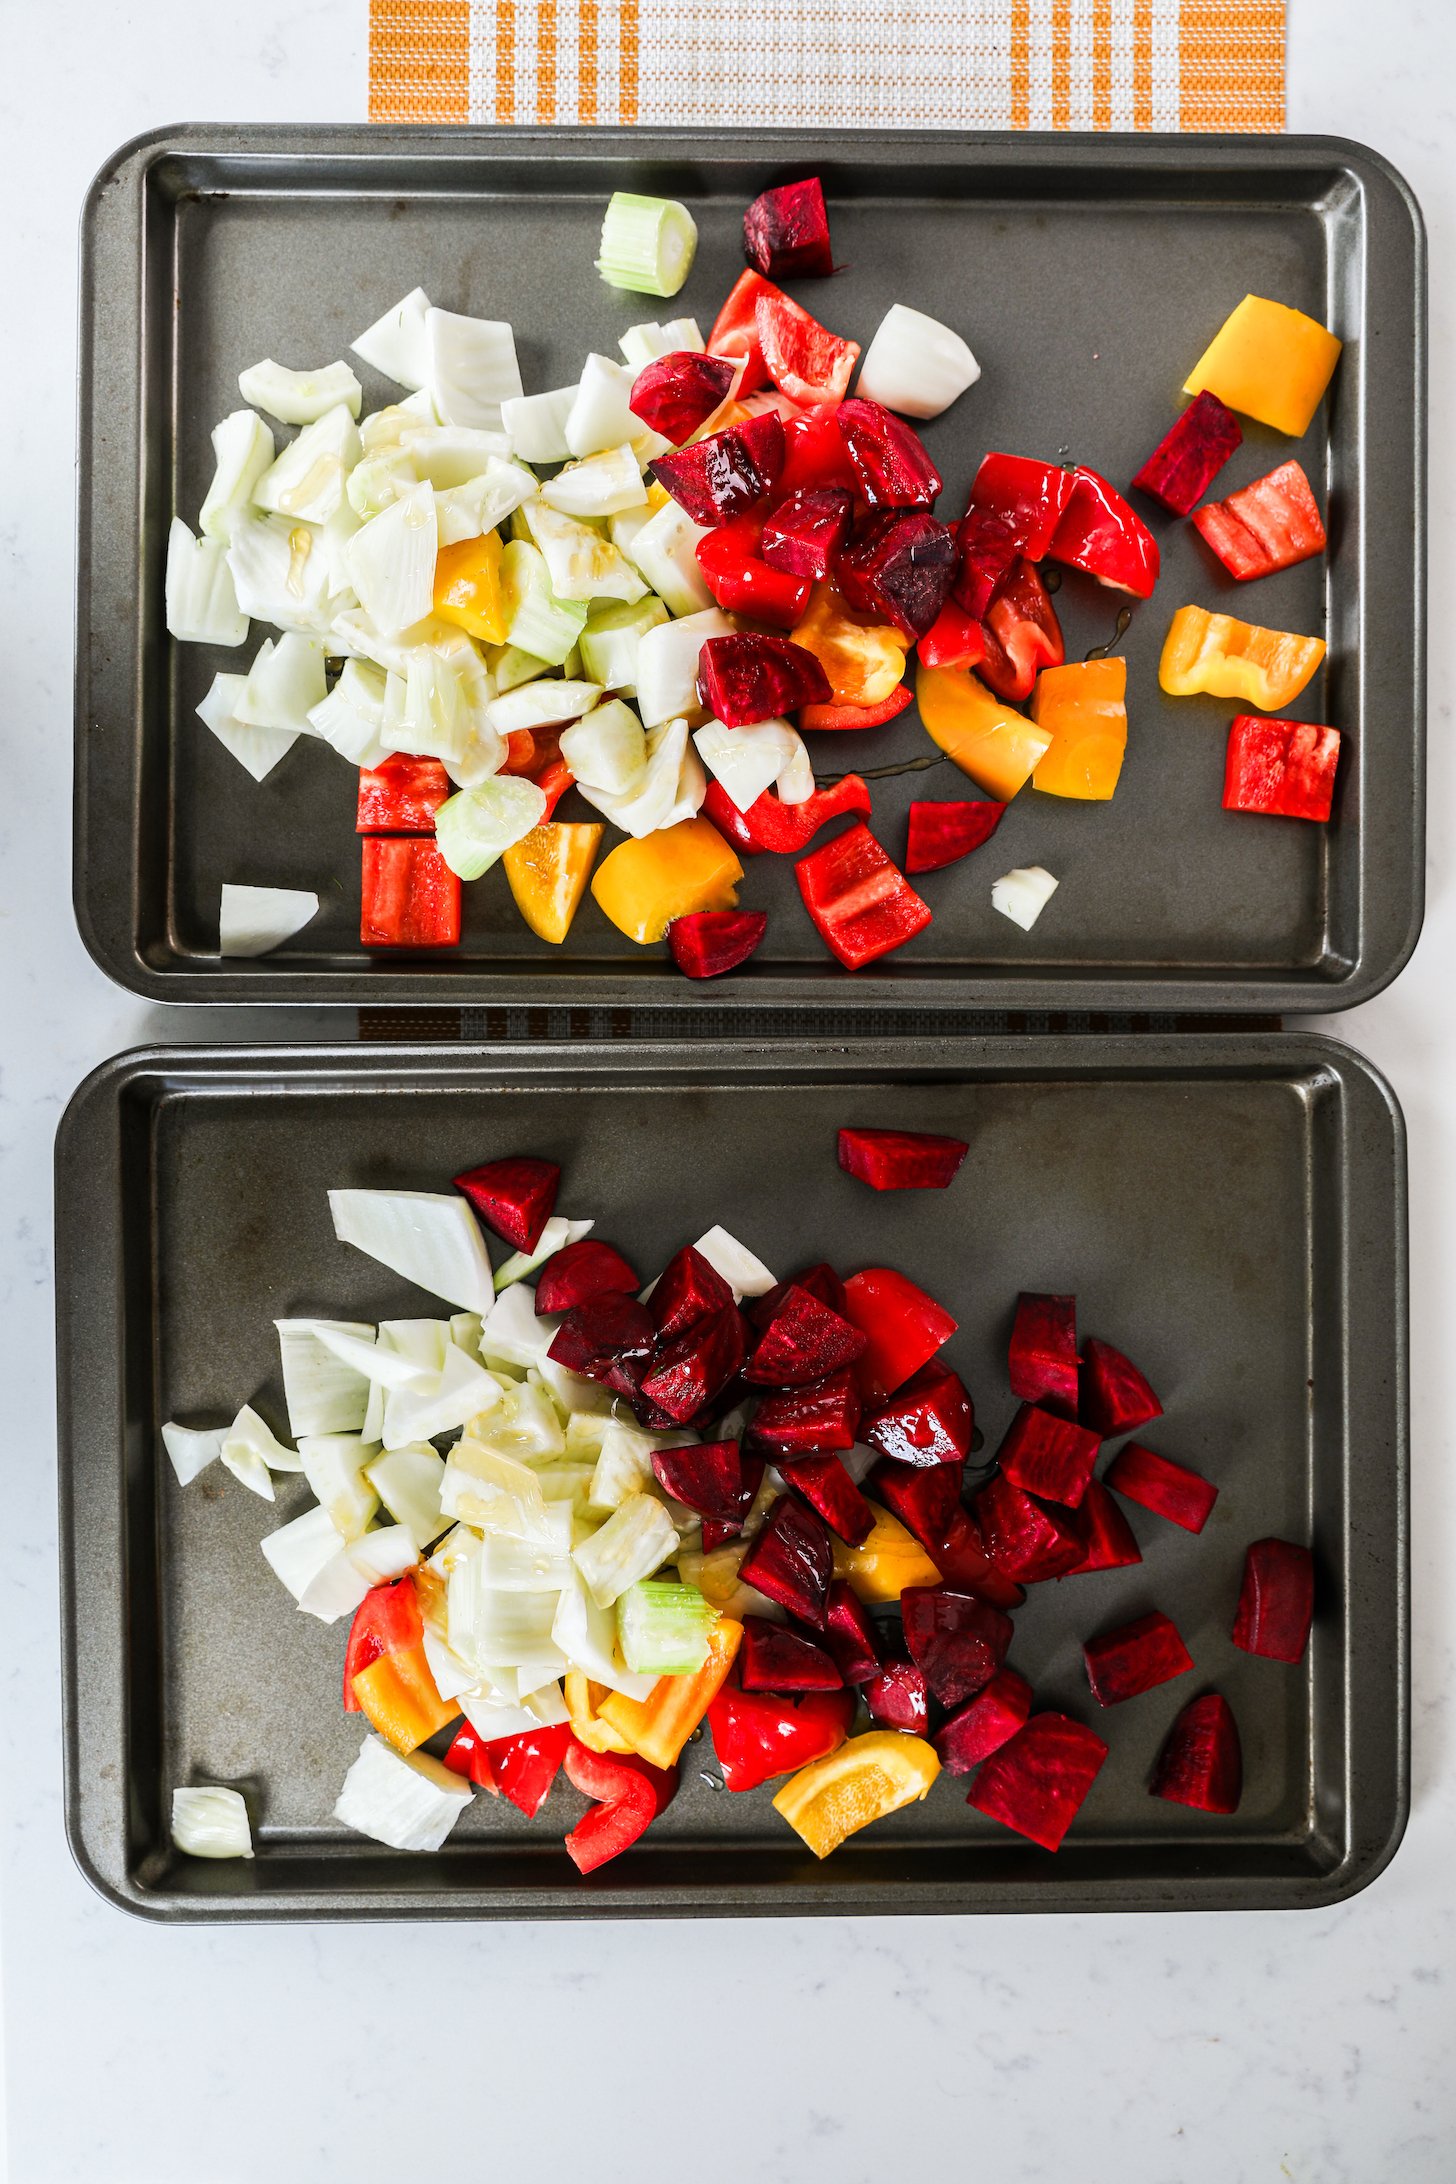 Two baking trays showcasing a medley of mixed vegetables, featuring cubed beets, diced peppers, and chopped fennel.